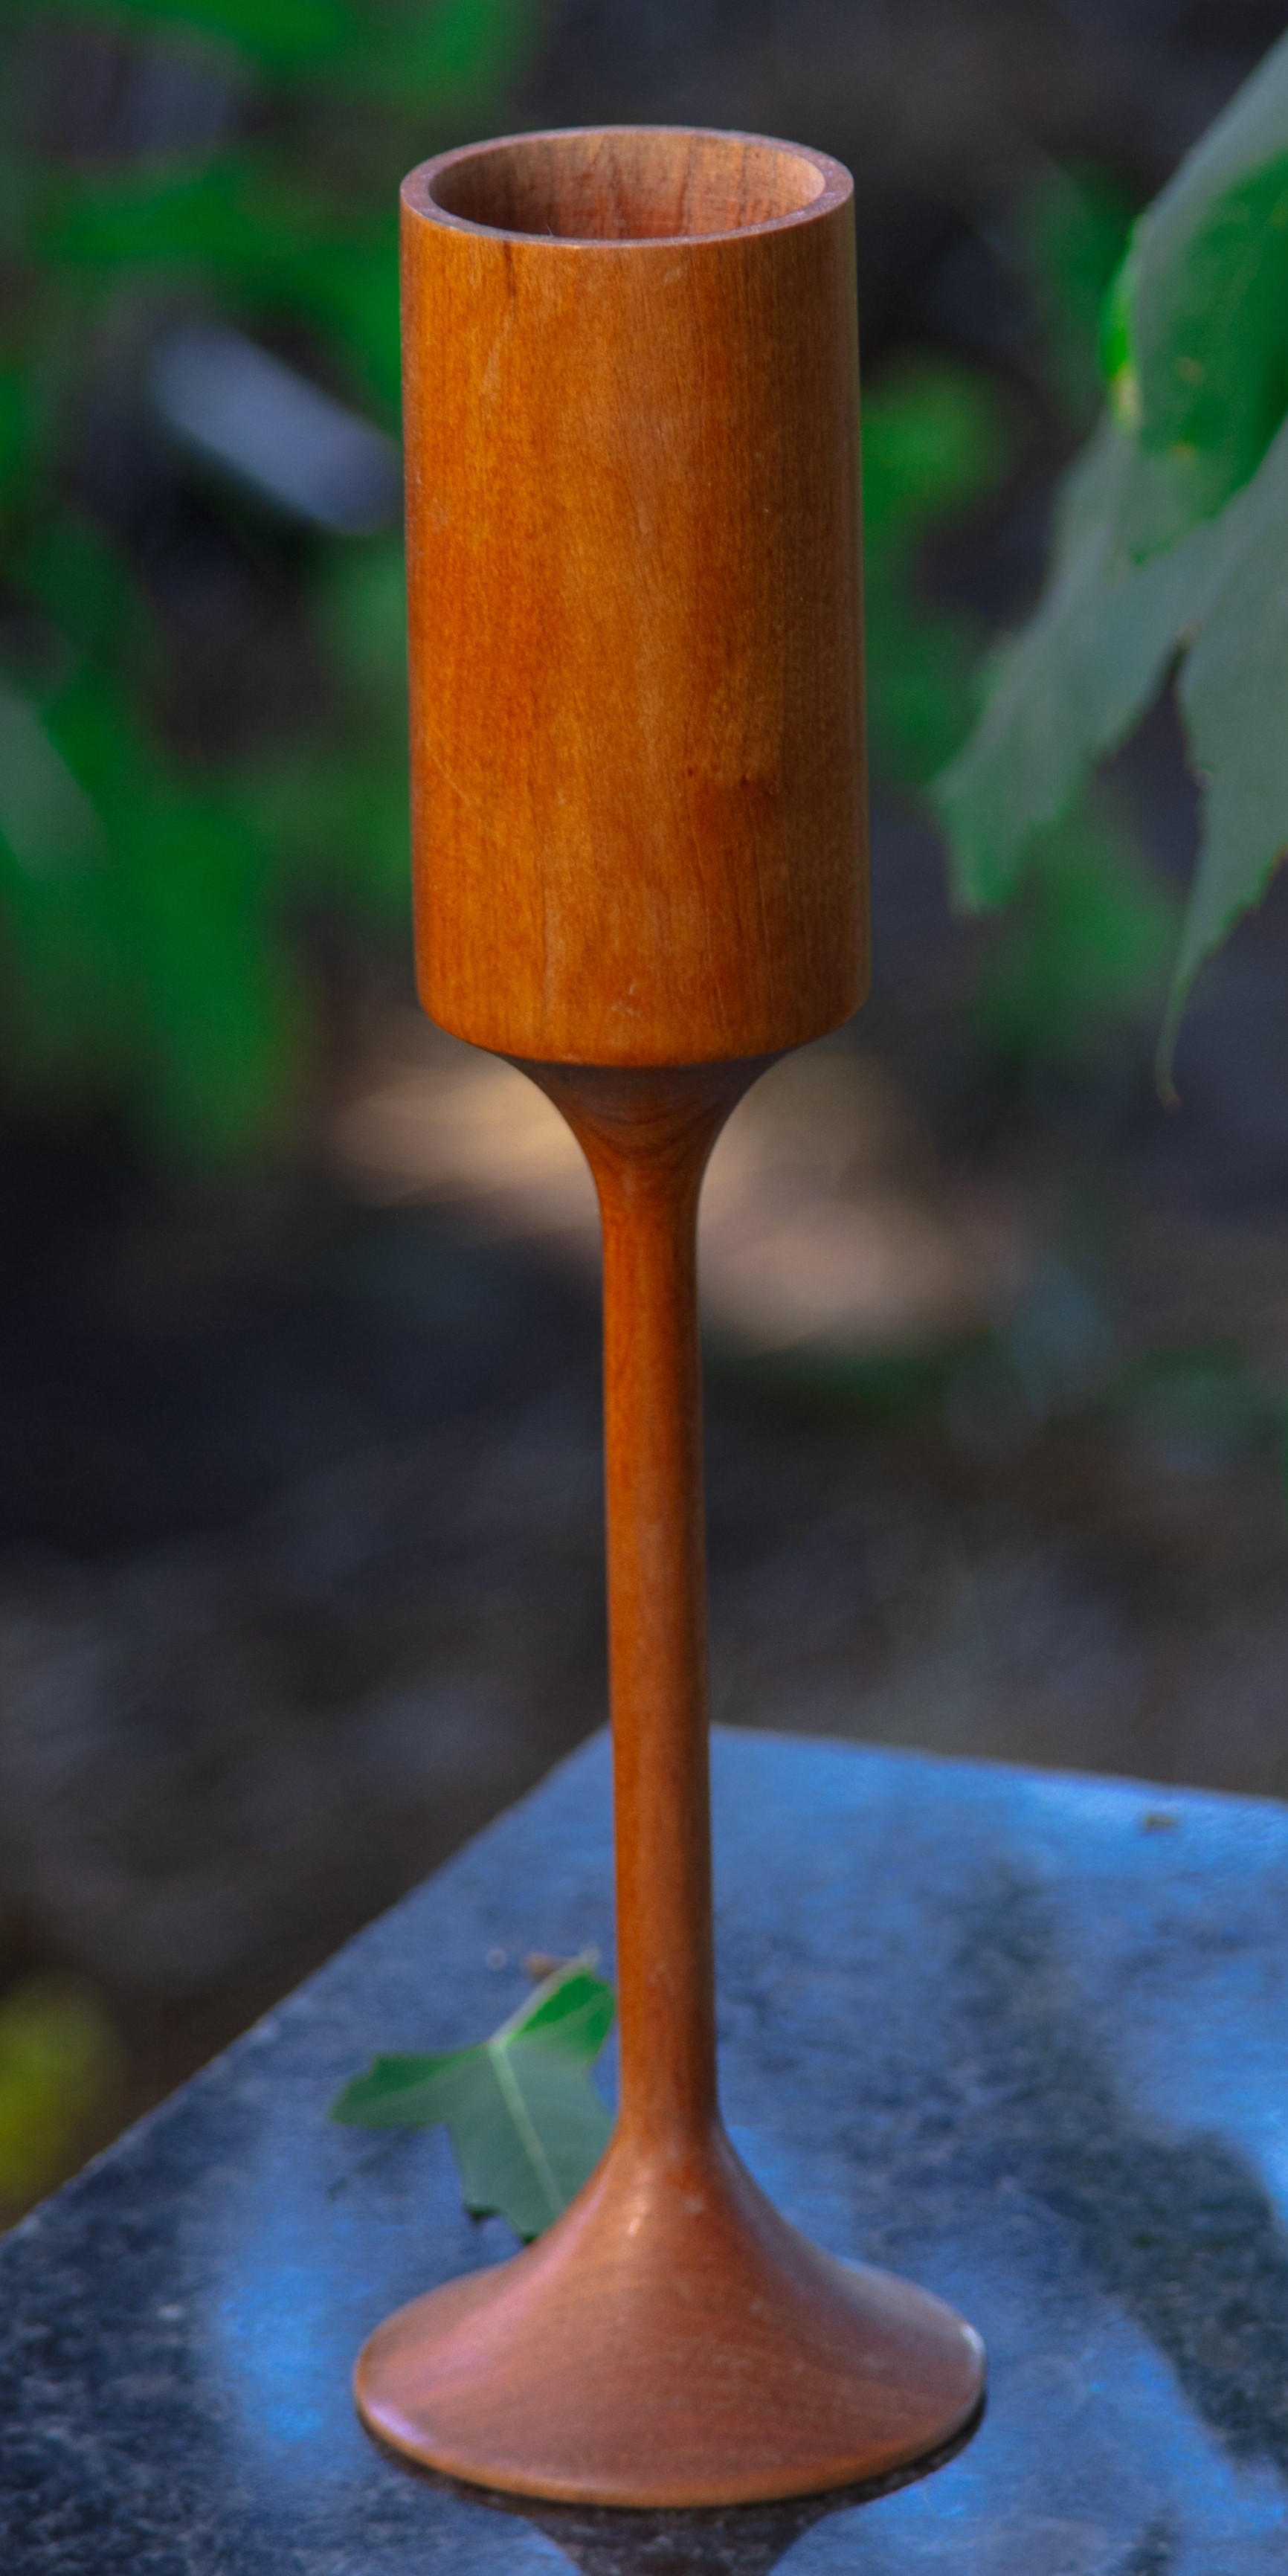 Cherry-wood-wine-cup-tall